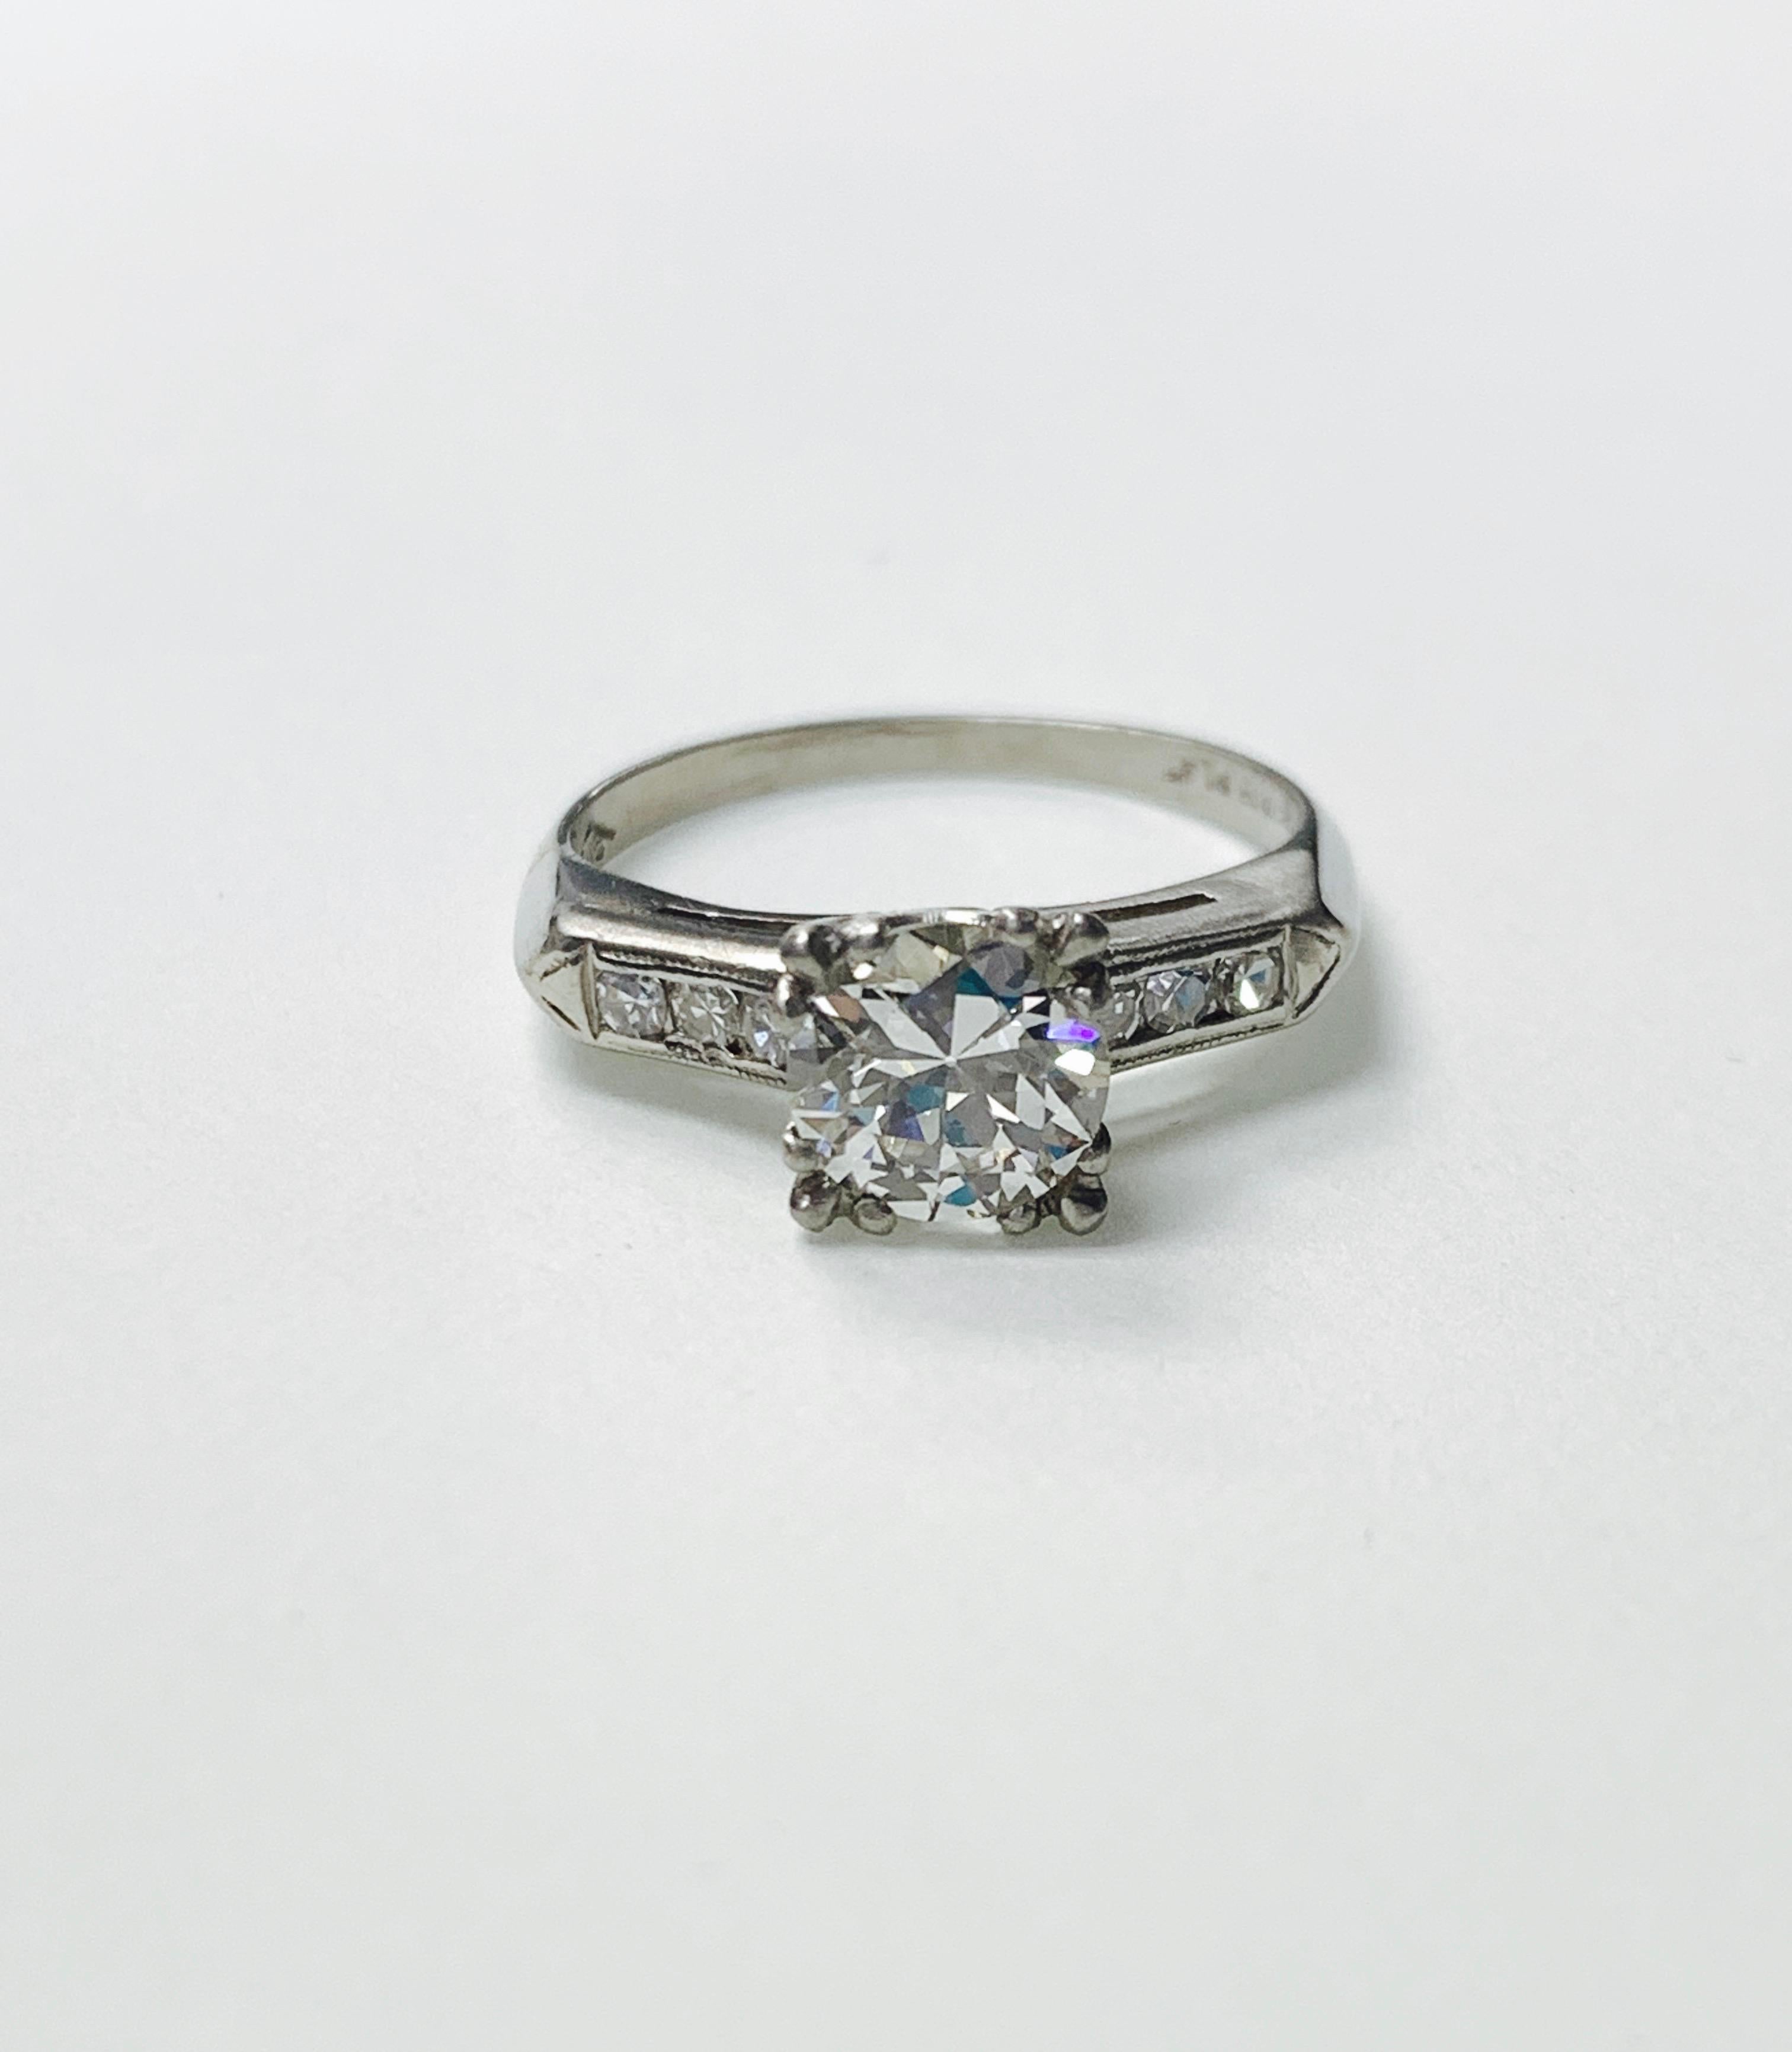 1940s GIA certified old european cut diamond ring in platinum. 
The details are as follows : 
Diamond weight : 1.01 carat ( I VVS2) 
Metal : Platinum 
Ring size : 6
